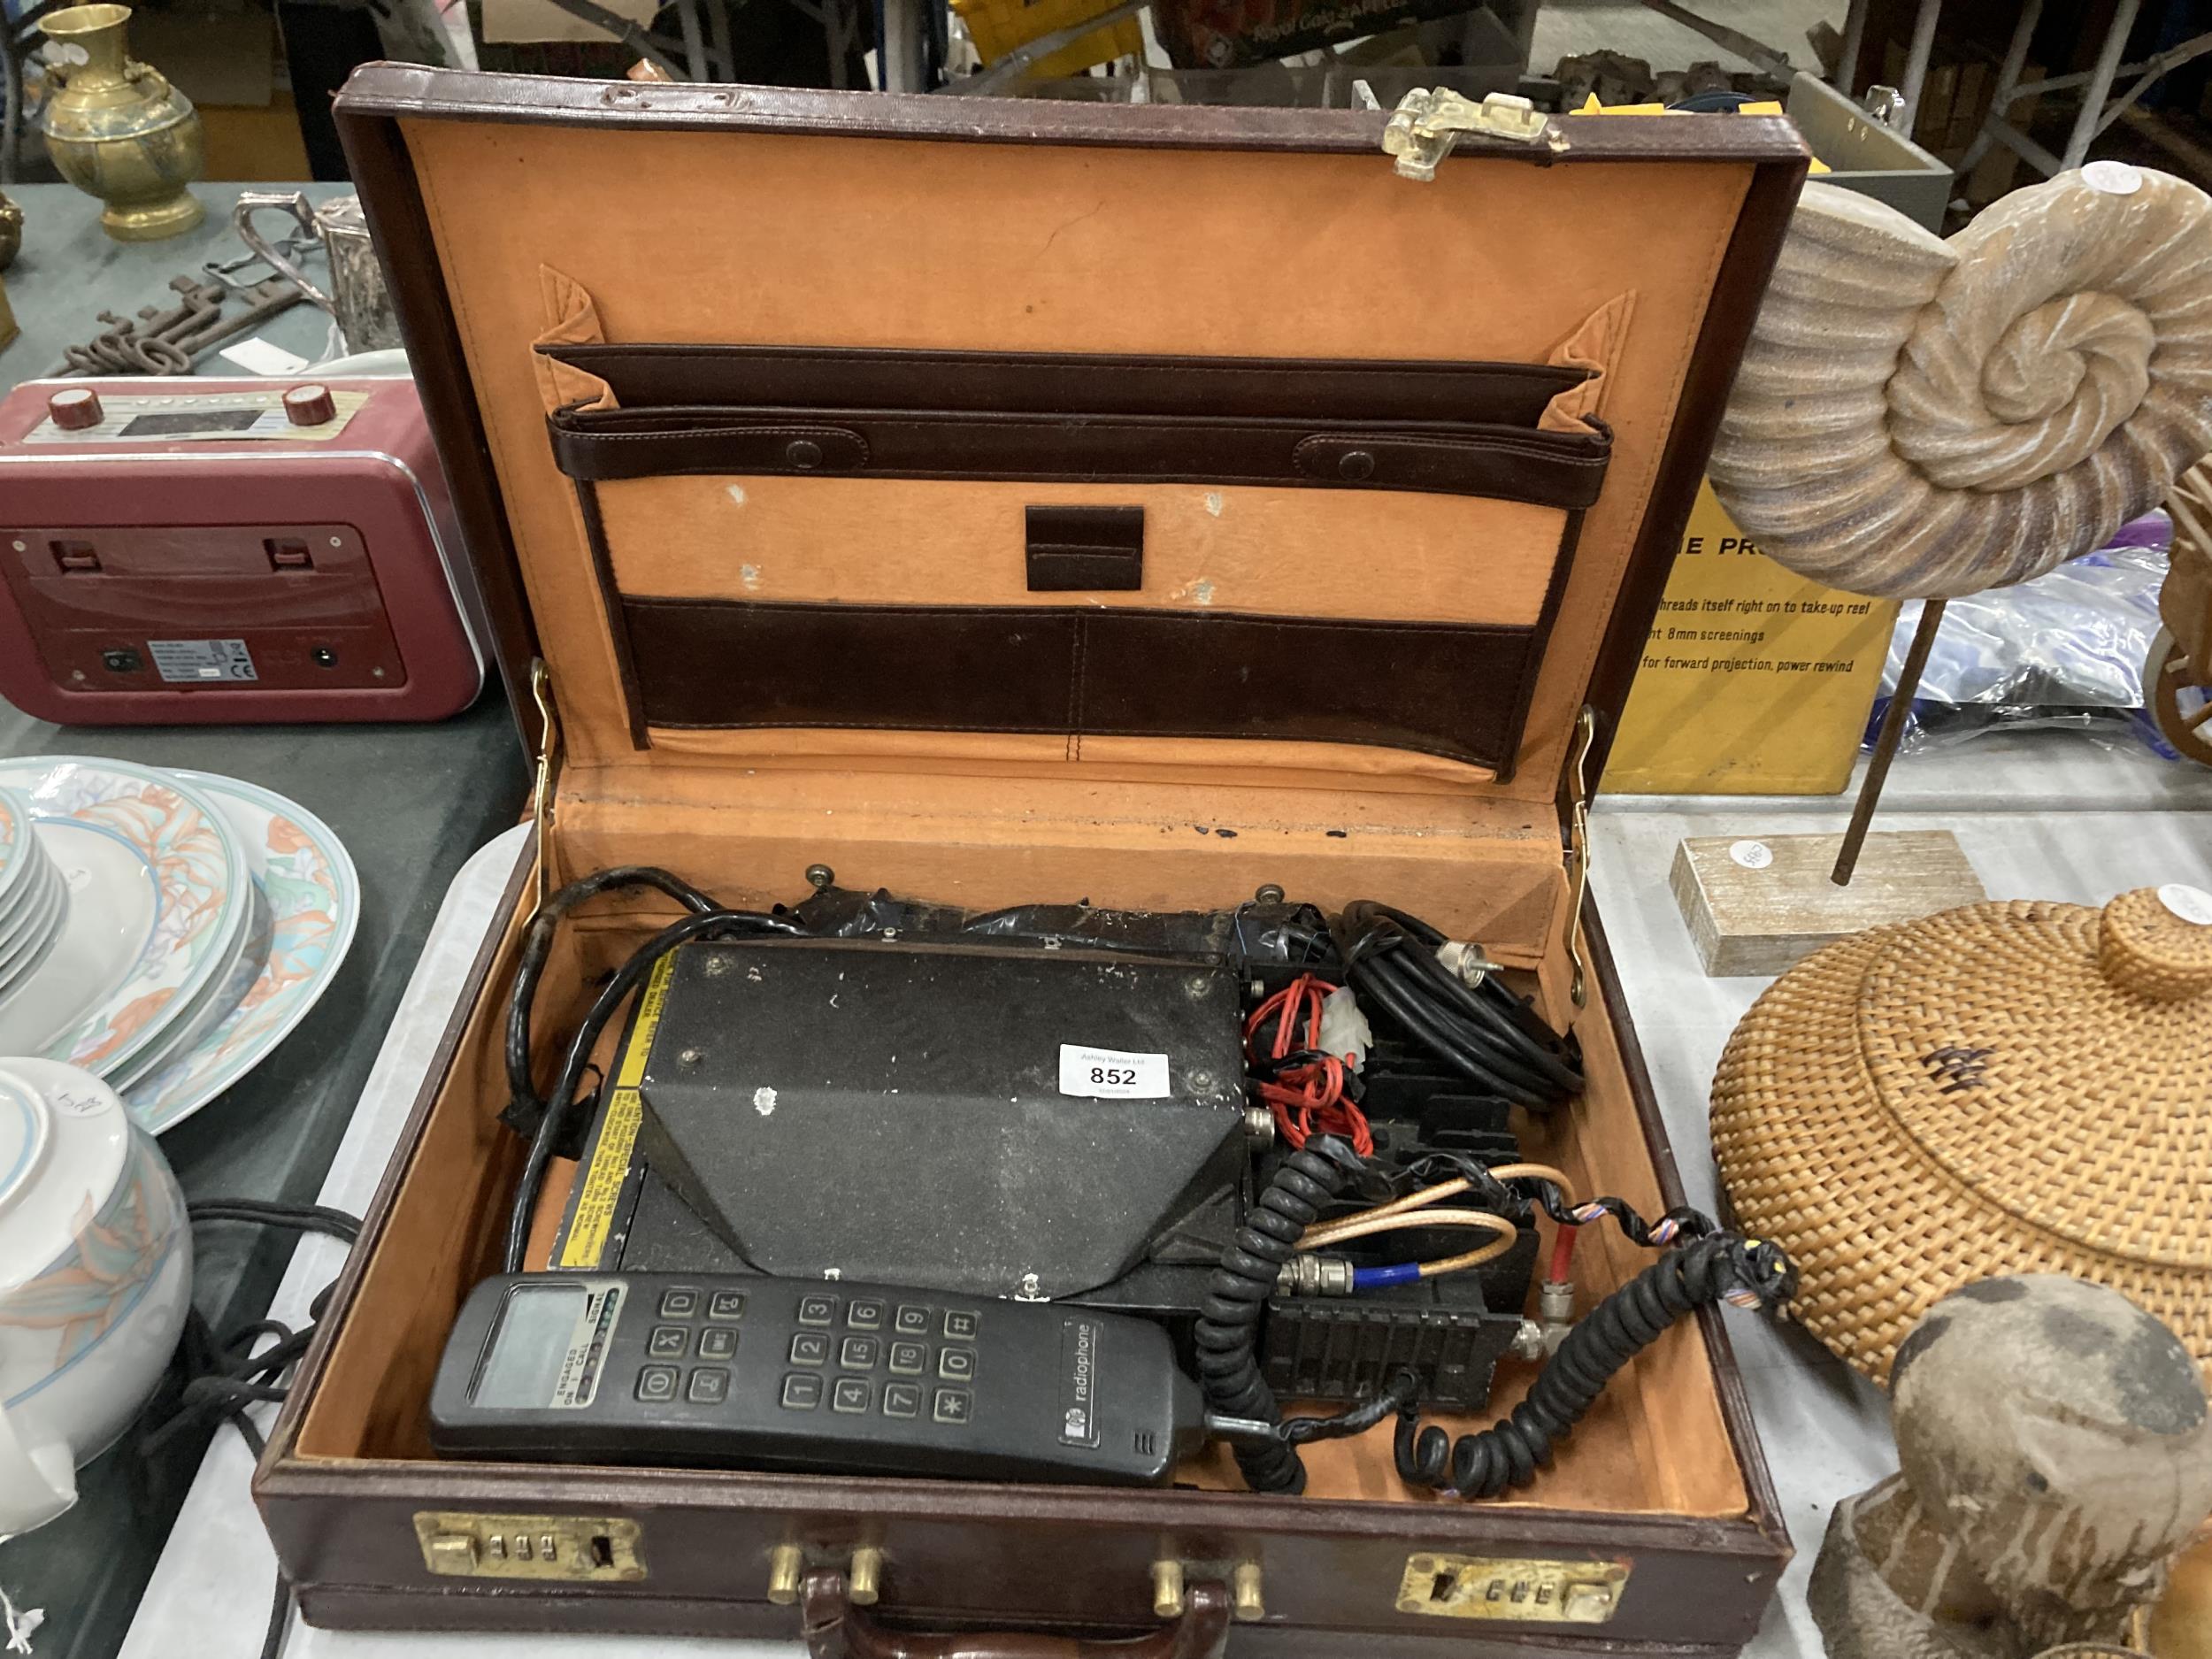 A VINTAGE MOBILE PHONE WITH CHARGER IN A BRIEFCASE